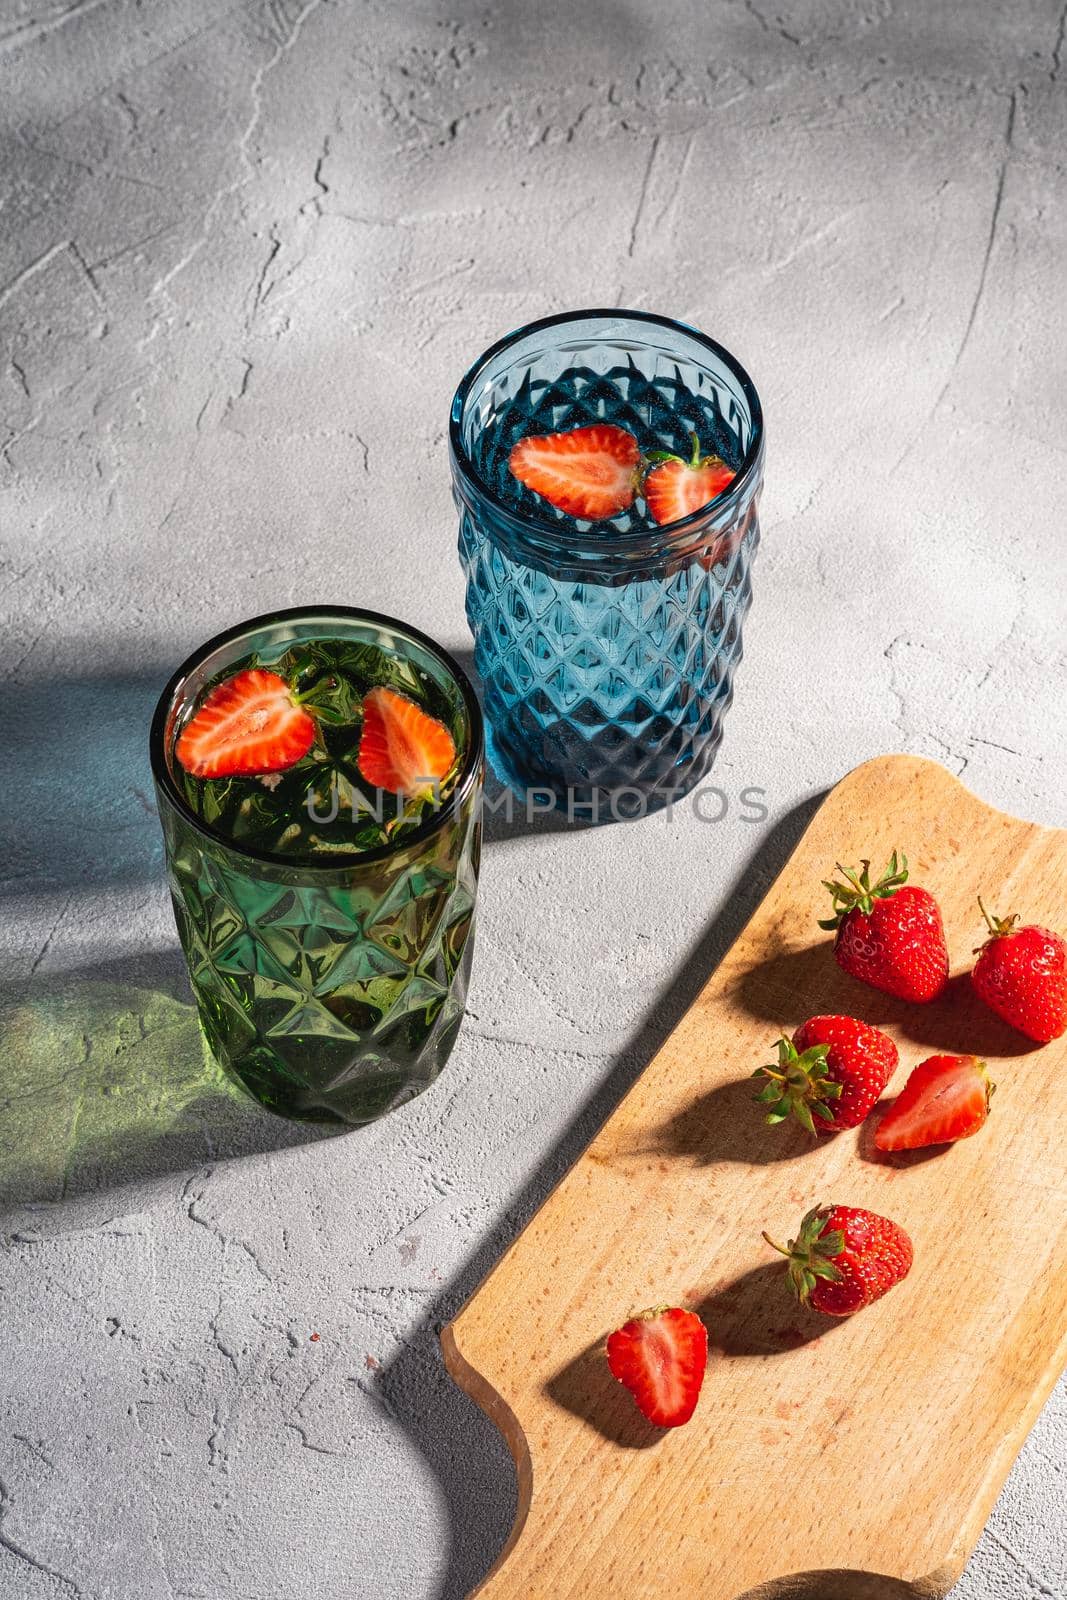 Two green and blue geometric glass cup with fresh water and strawberry fruits with colorful shadow light rays near to wooden cutting board on stone concrete background, angle view by Frostroomhead